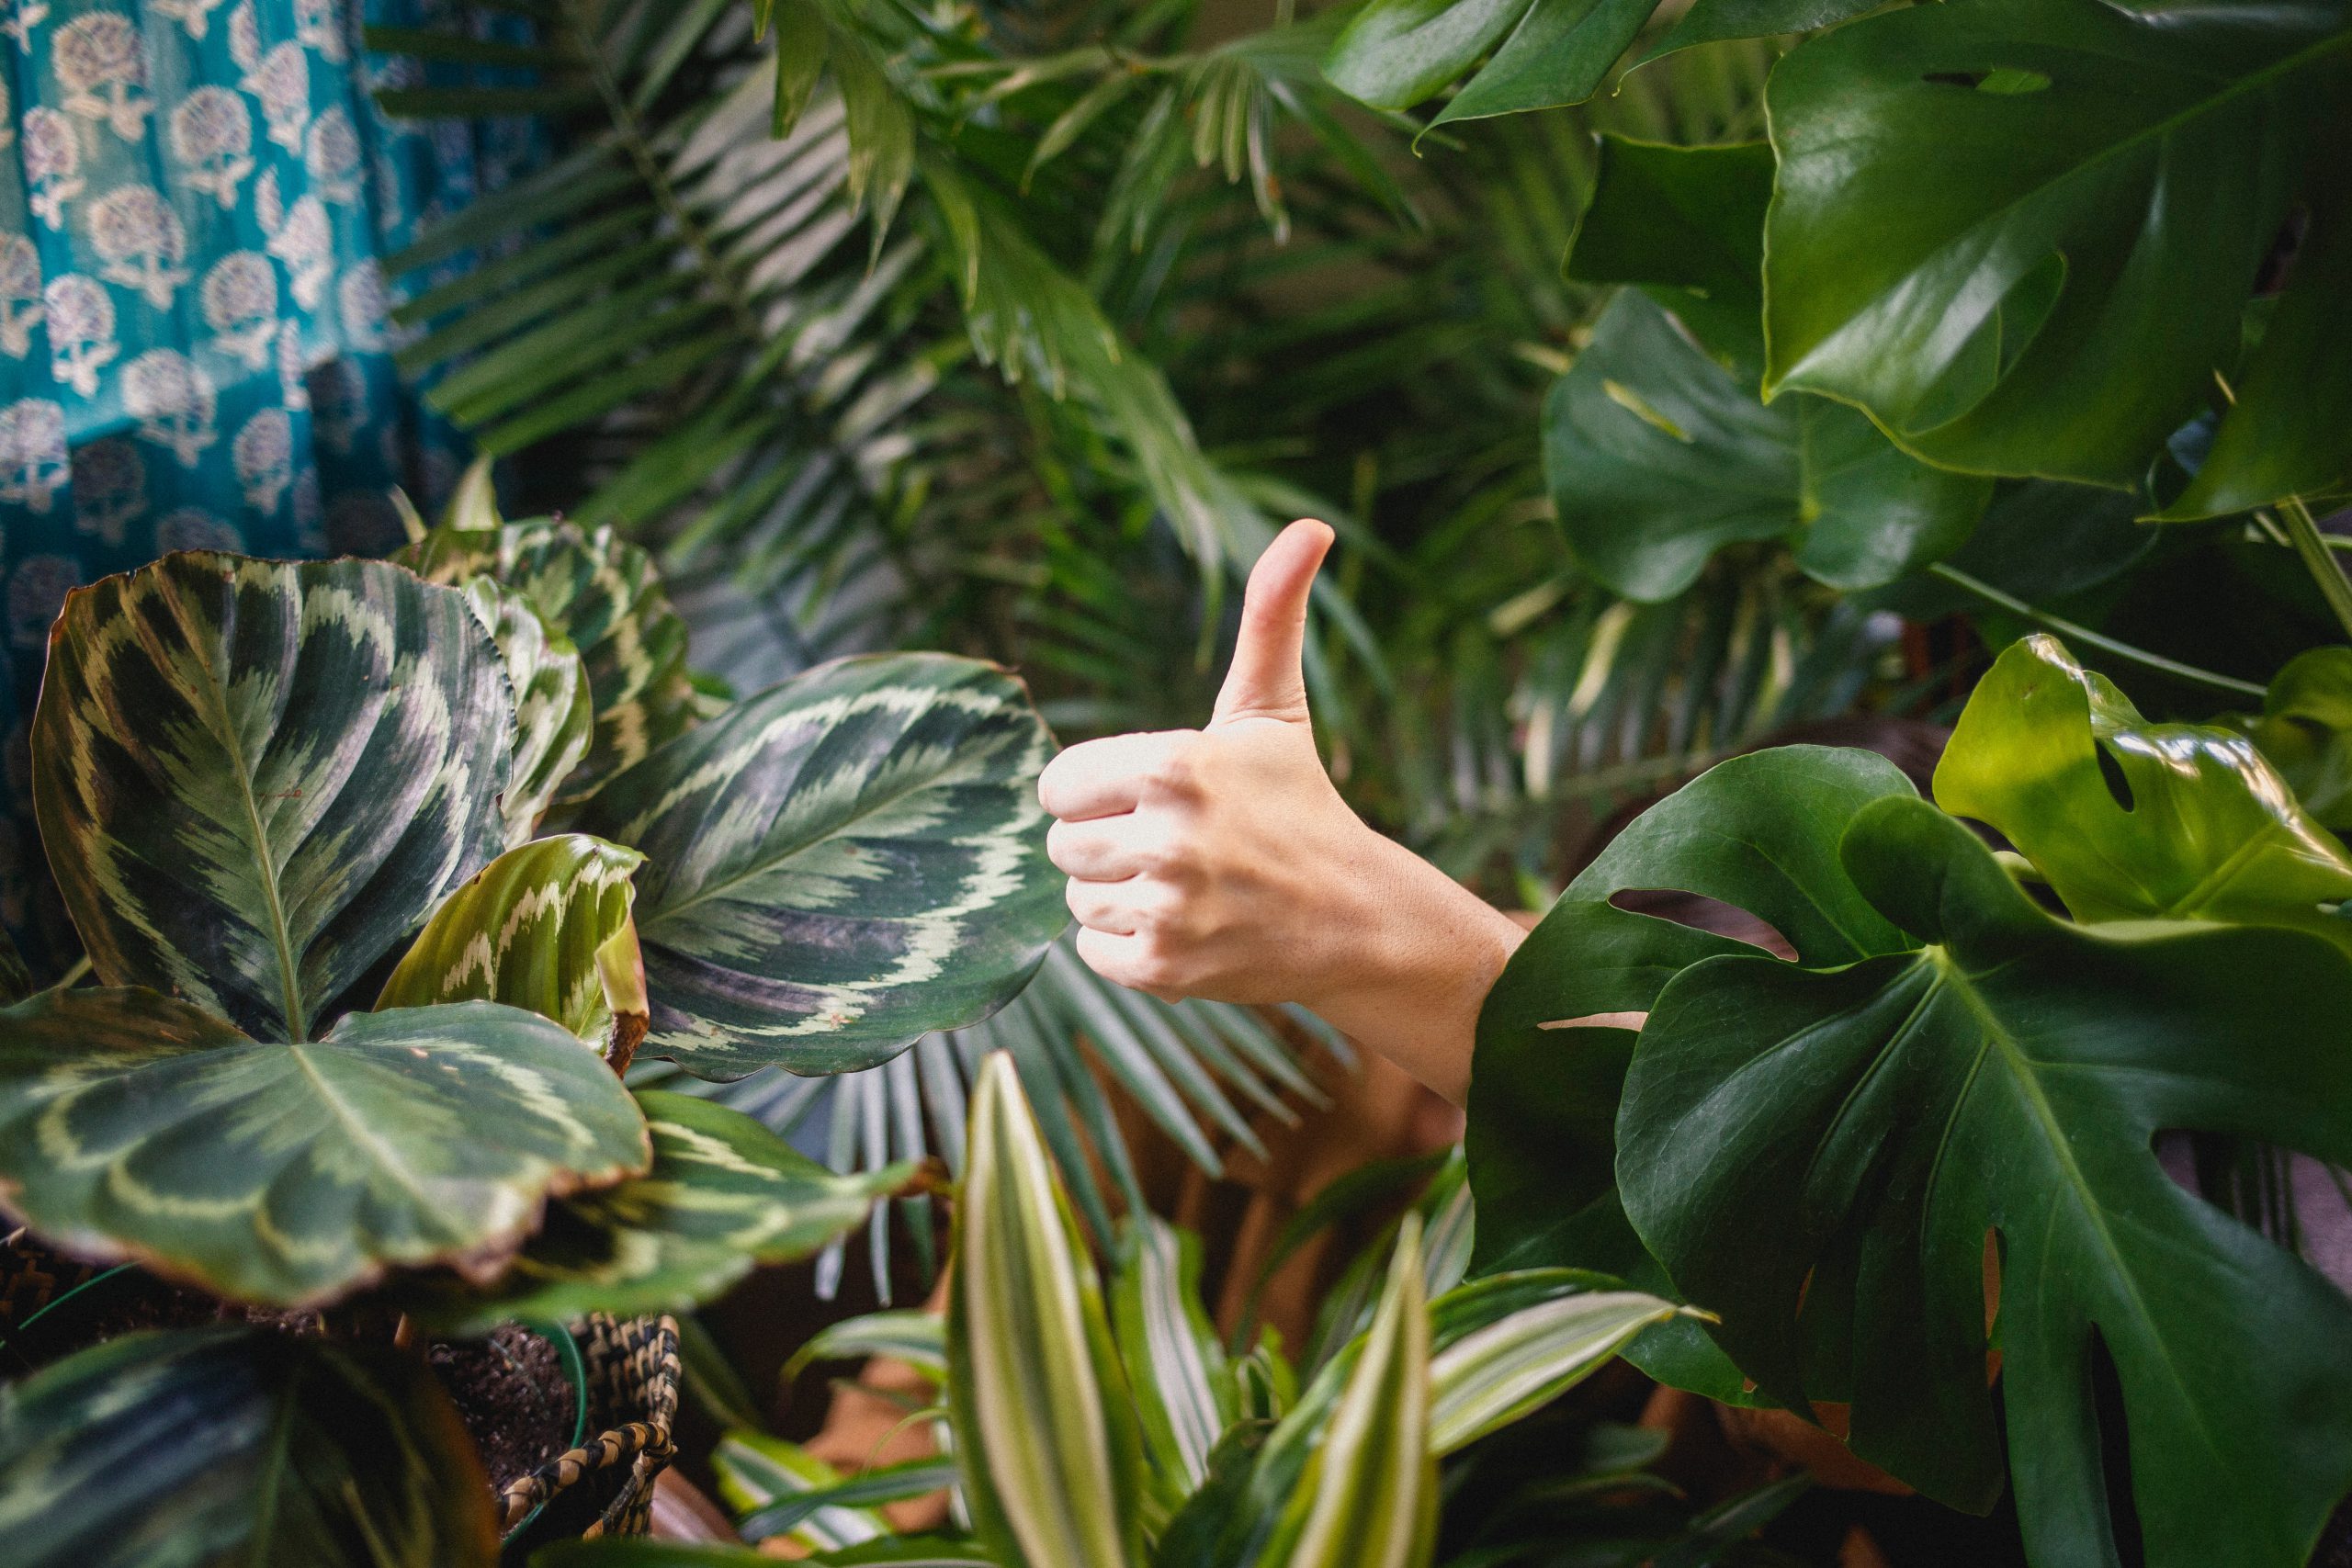 thumbs up surrounded by plants